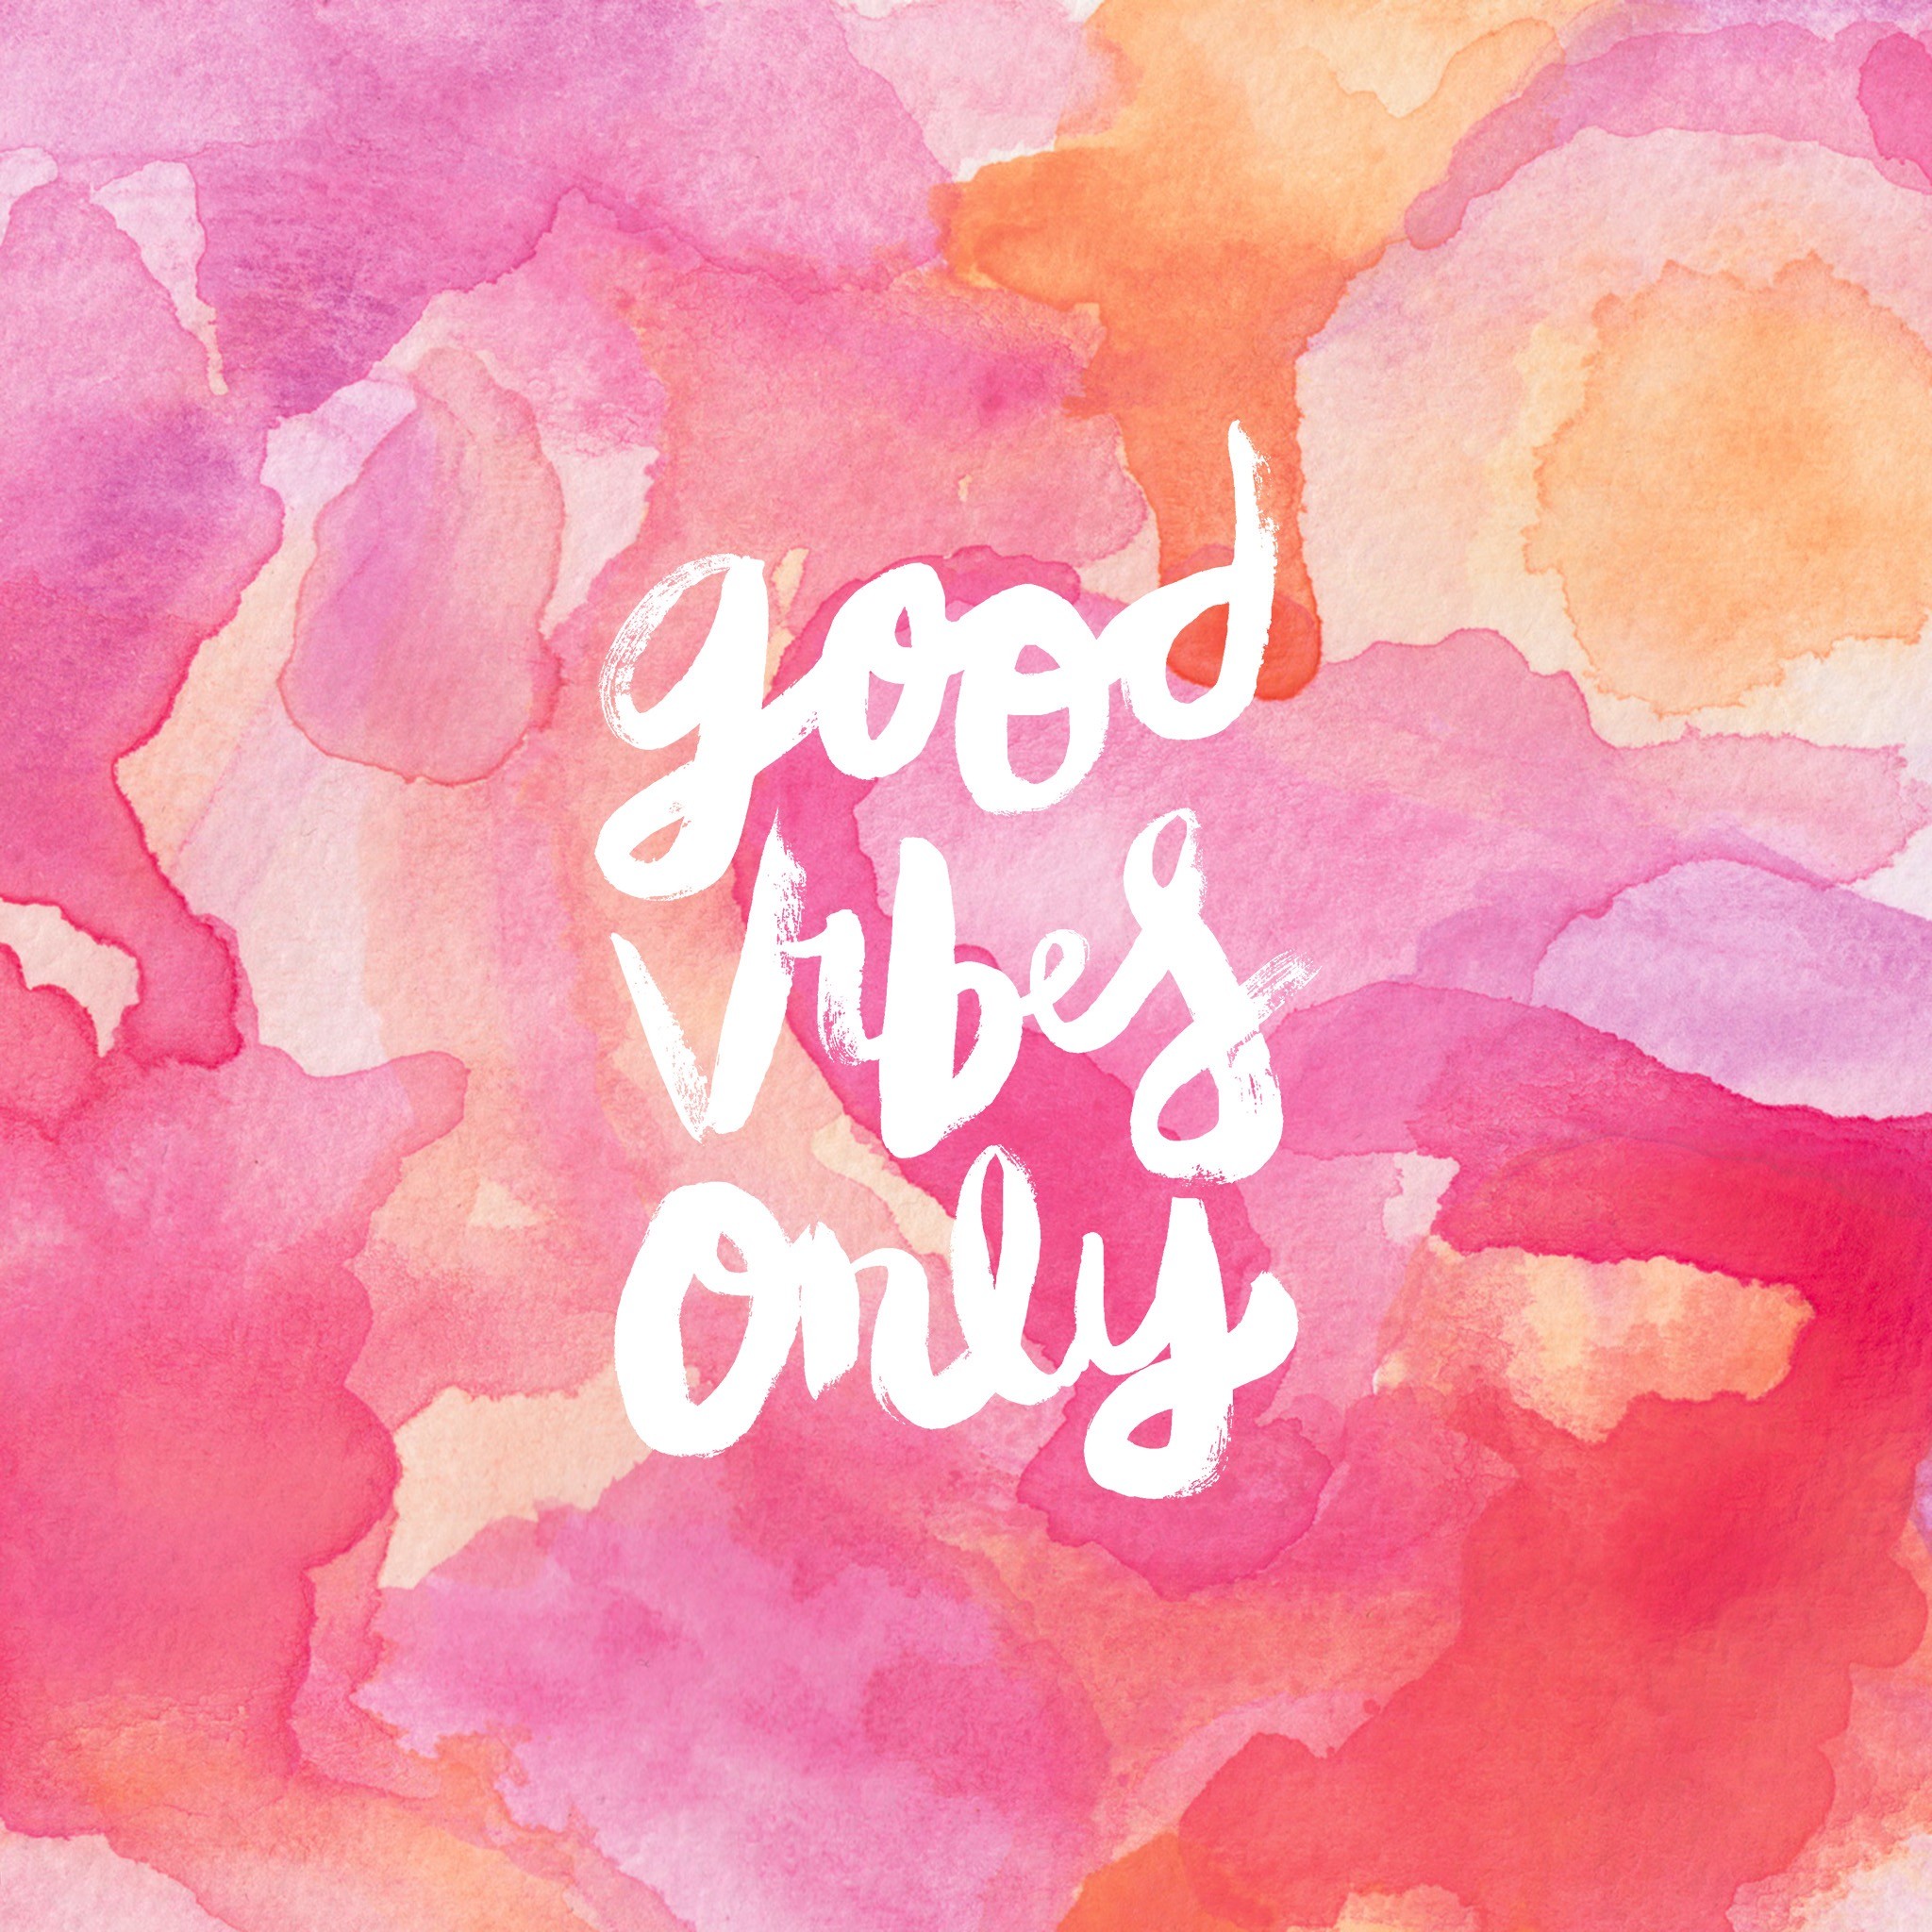 Discover 88+ good vibes wallpaper - in.cdgdbentre